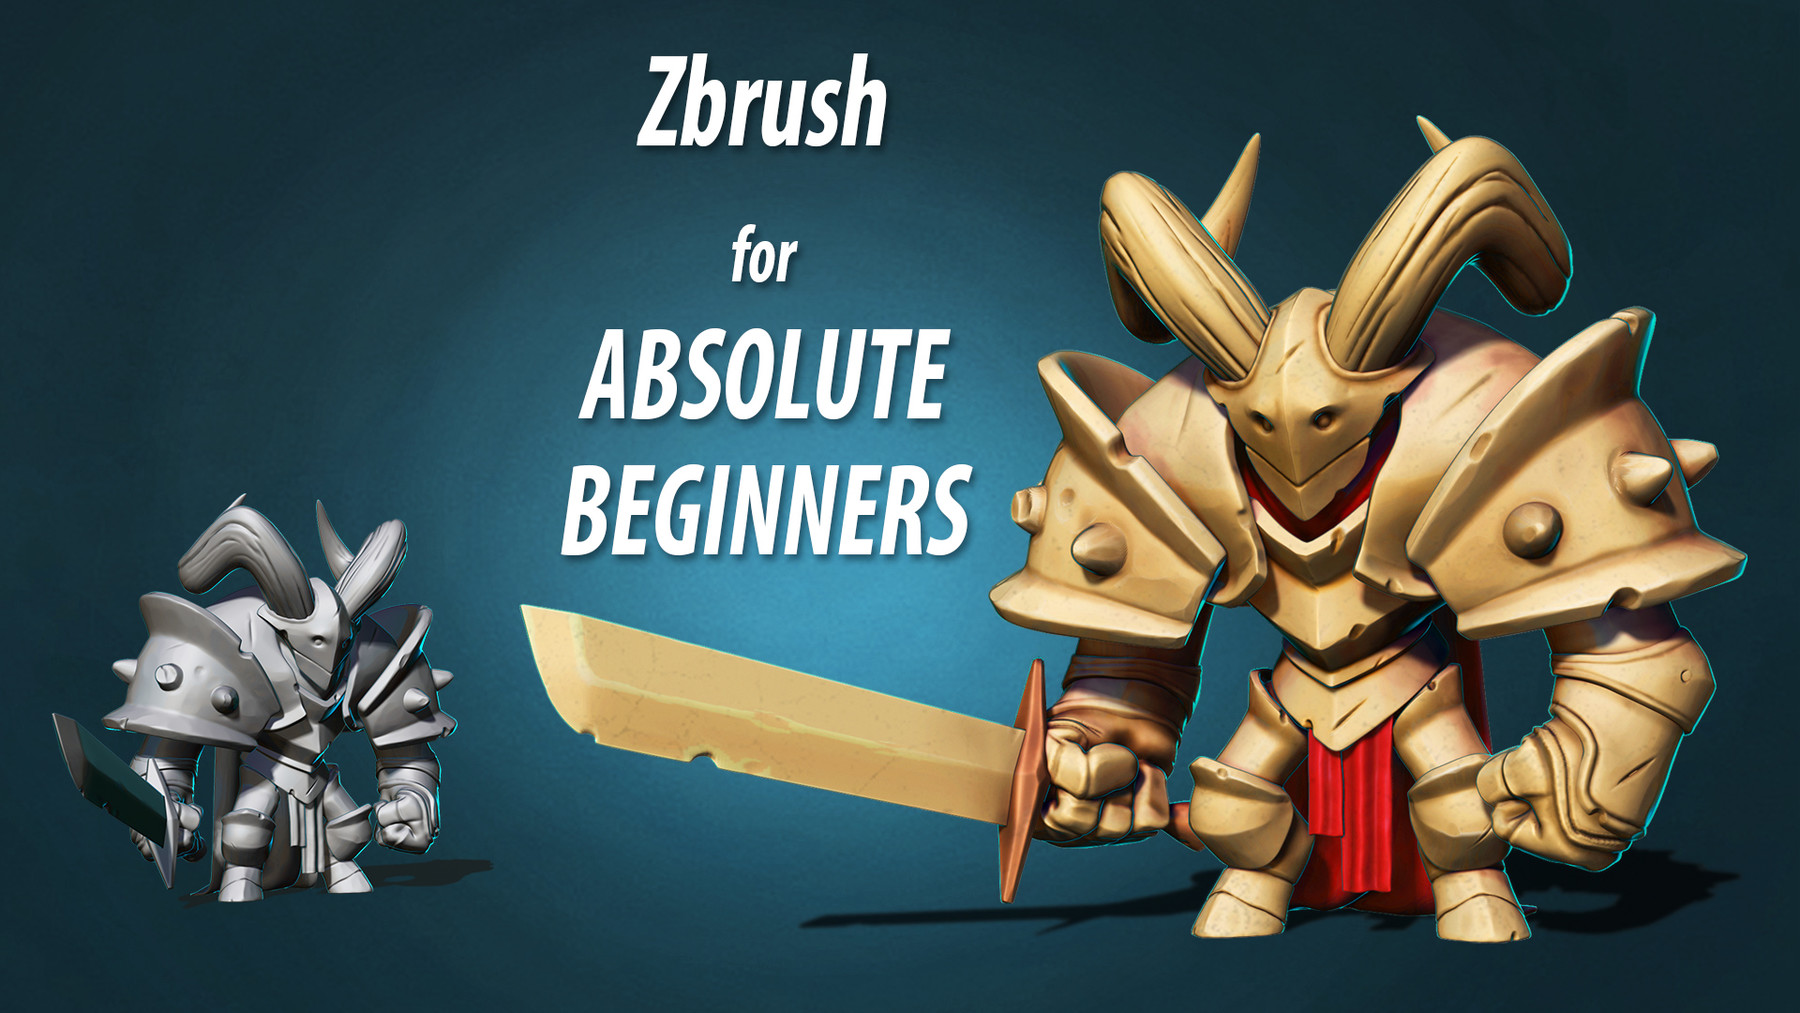 zbrush course outline